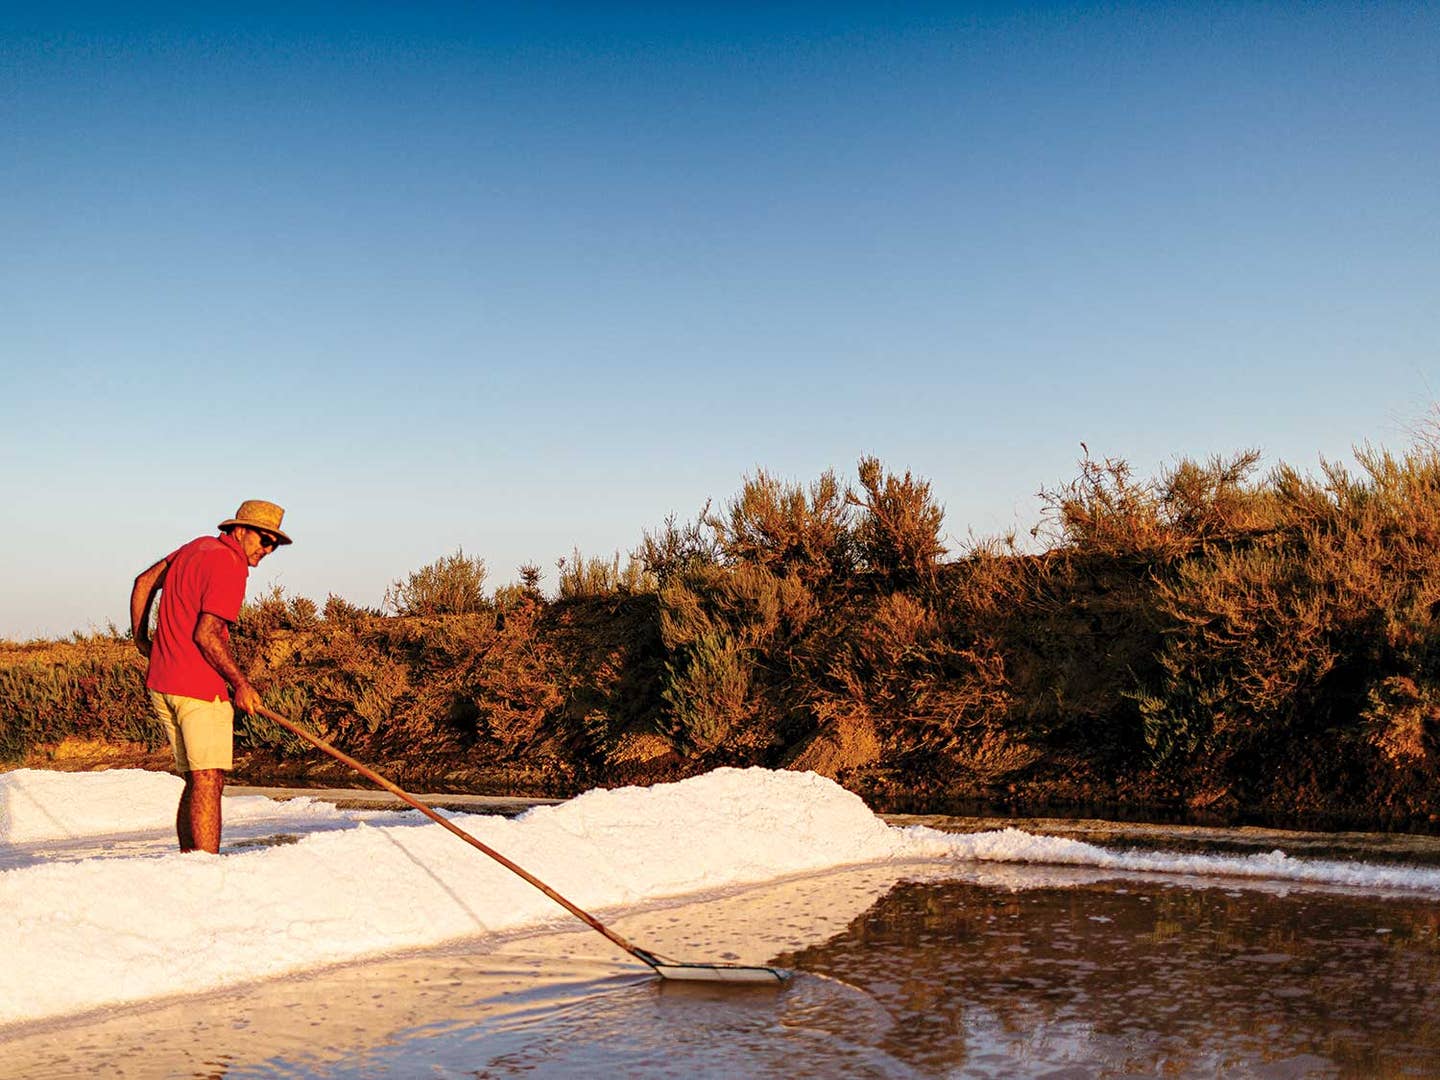 Flor de Sal from Portugal: How This Second-Generation Salt Maker Is Updating the Family Business